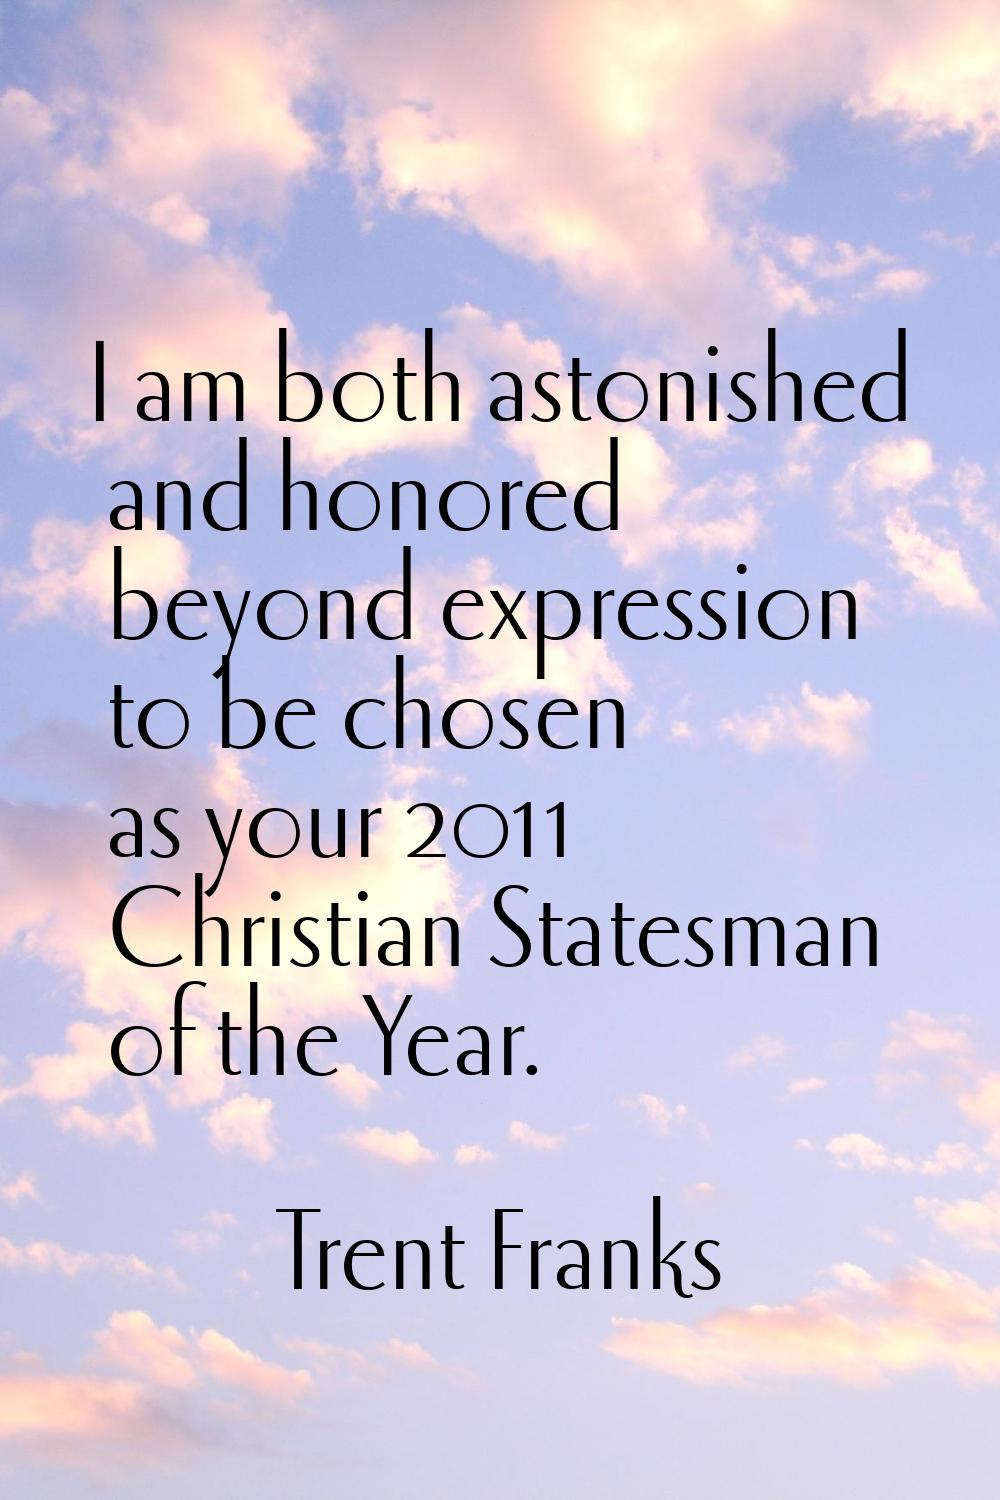 I am both astonished and honored beyond expression to be chosen as your 2011 Christian Statesman of